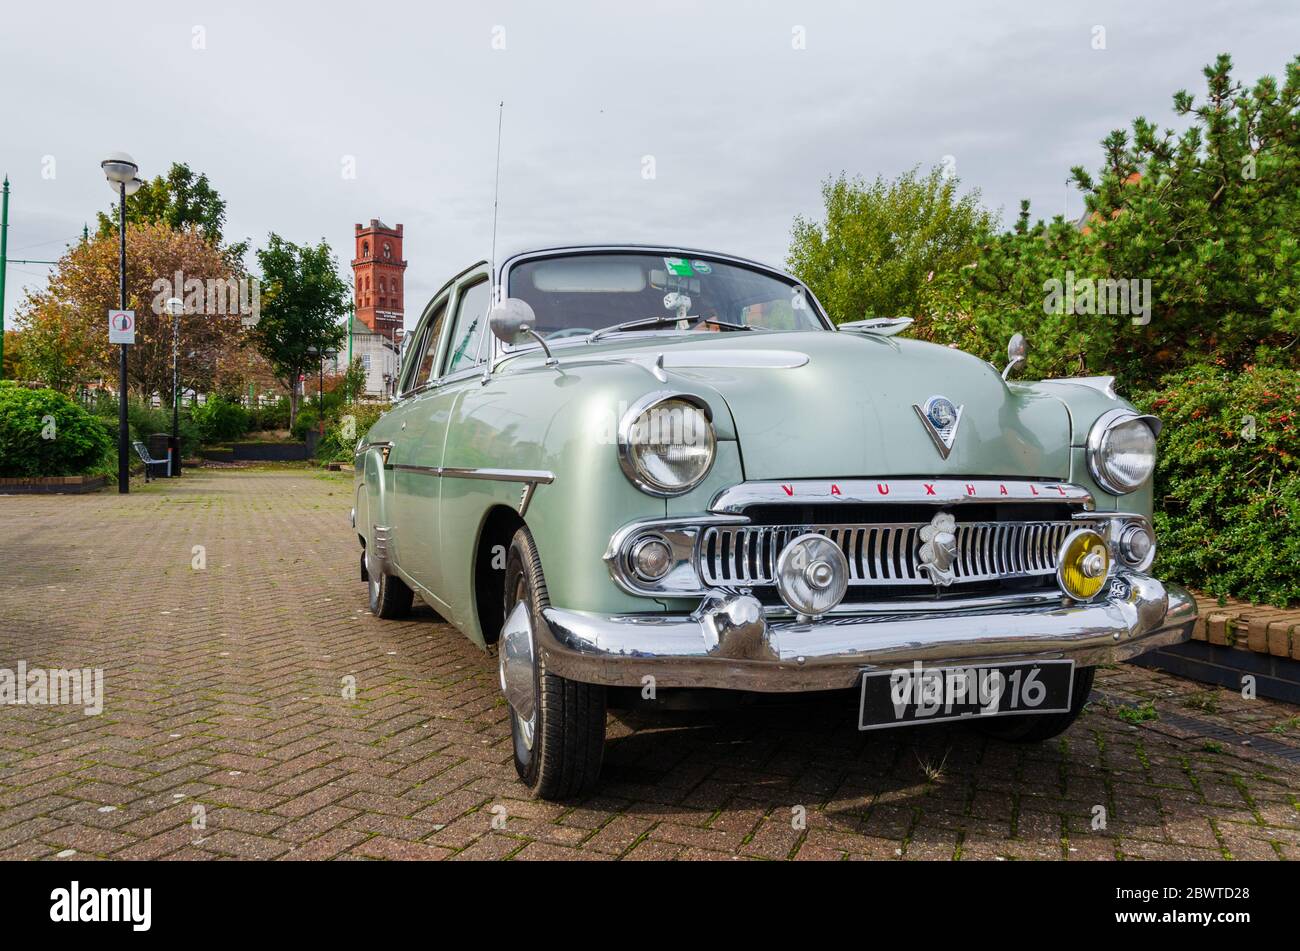 Birkenhead, UK: Oct 1, 2017: VBP 916 is the registration number for a Vauxhall Cresta E which was manufactured in 1956. Stock Photo